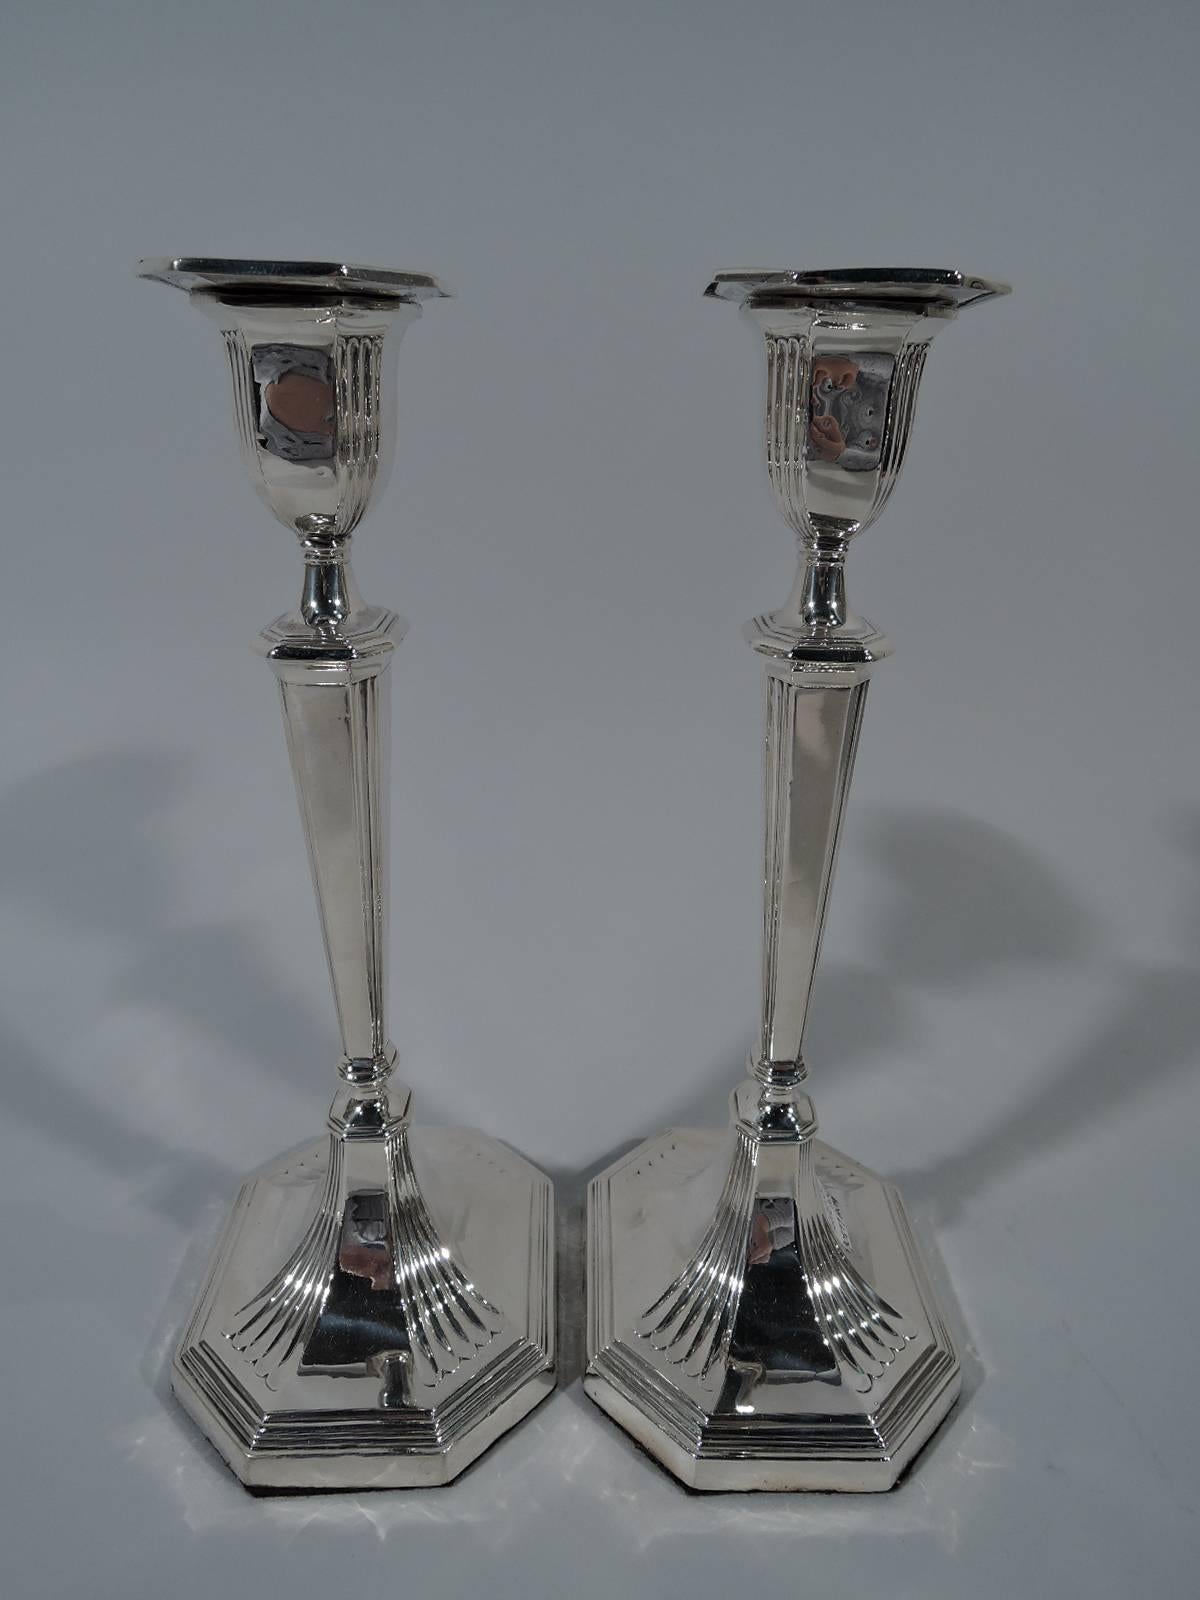 Pair of Edwardian sterling silver candlesticks. Made by William Hutton & Sons in London in 1901. Each: Classic tapering pillar with chamfered rectangular detachable bobeche. Foot same. Fine reeding. Hallmarked. Weighted.